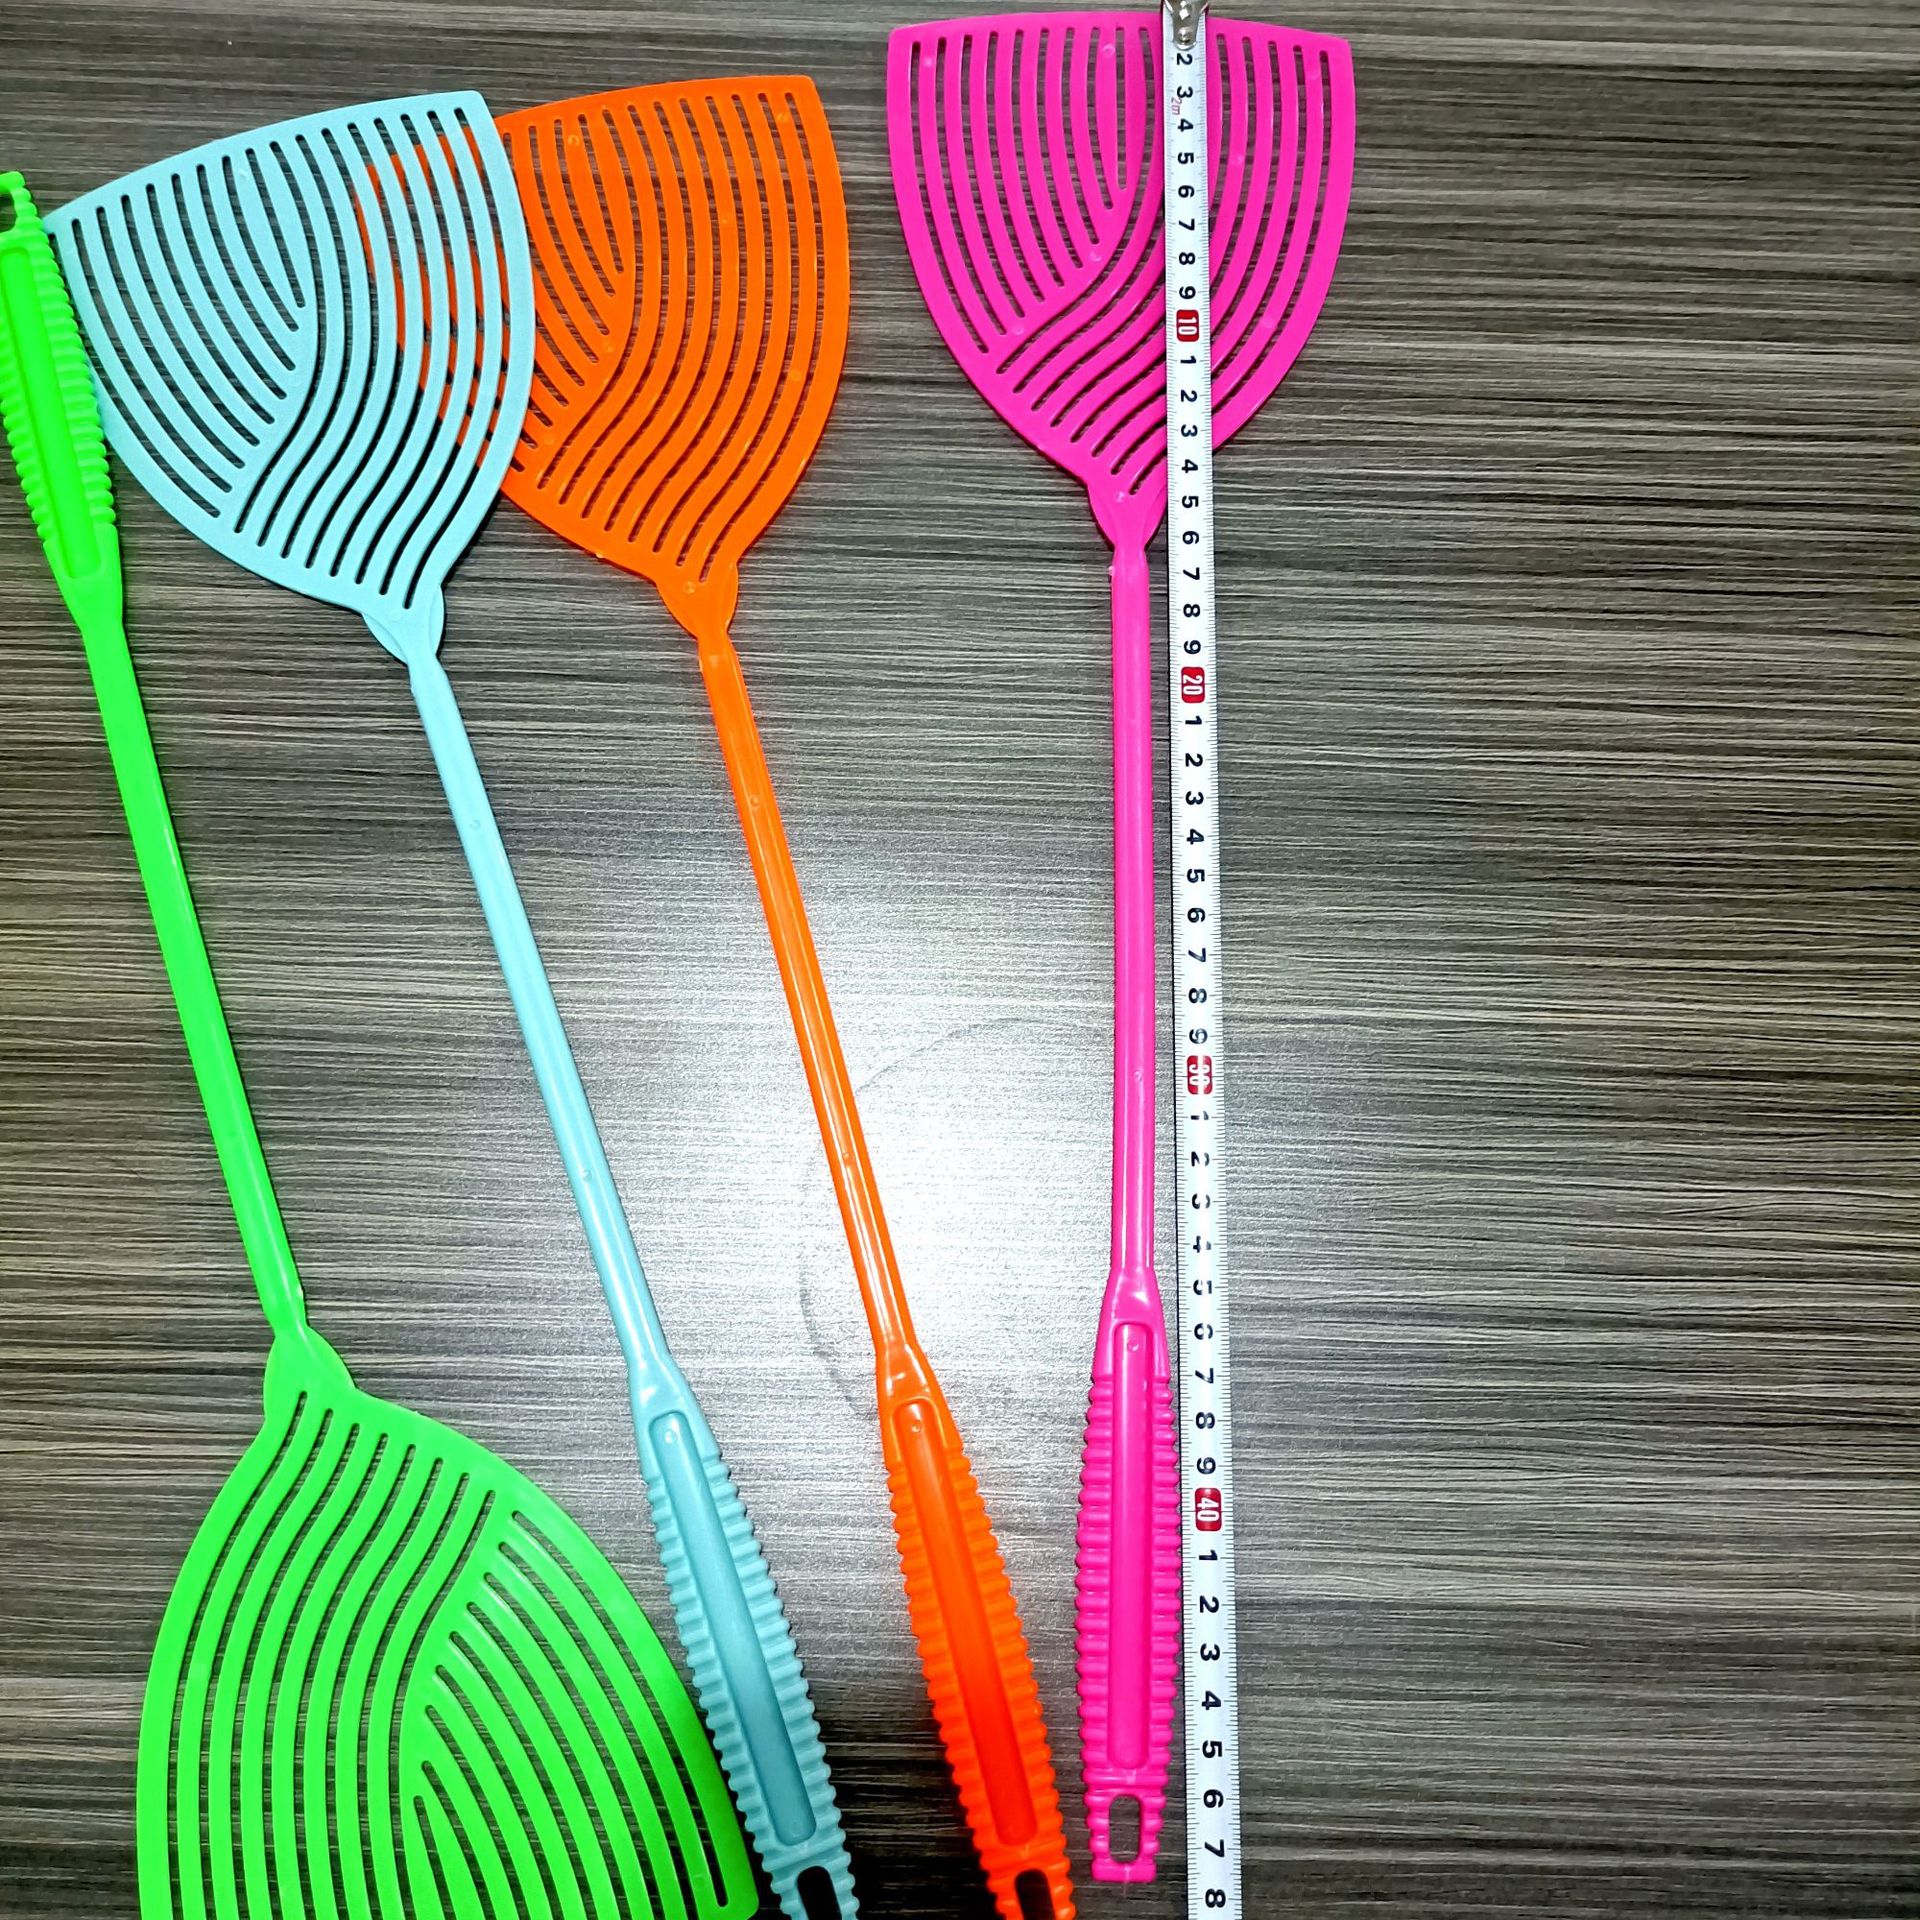 1 Yuan Store Swatter Plastic Fly Swatter Swatter A1 Plastic Fly Swatter Swatter 1 Yuan Supply 1 Yuan Wholesale Supply